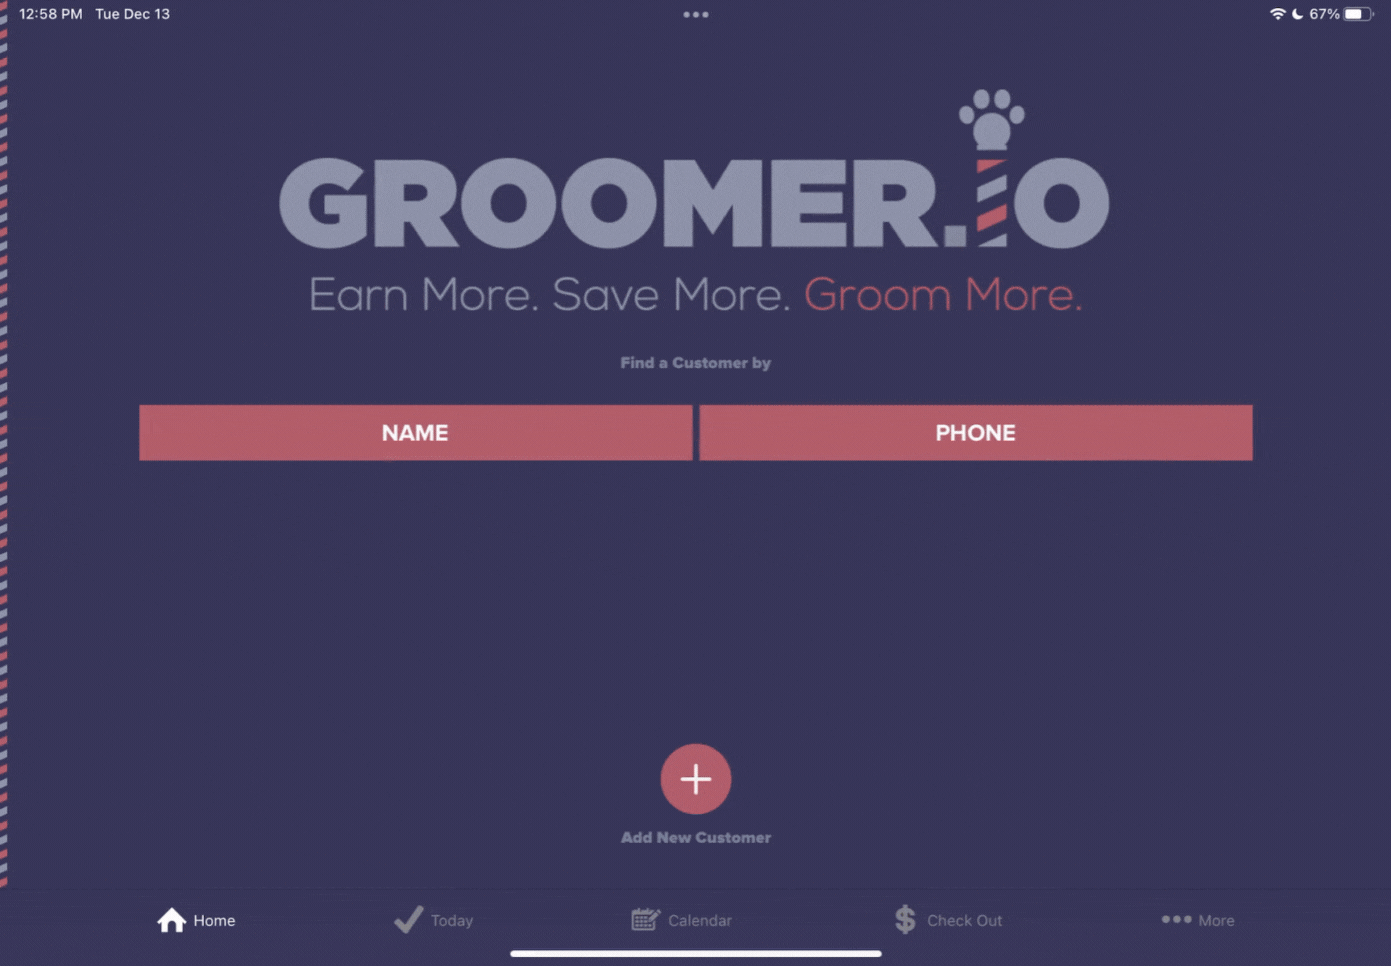 Going to reports within the Groomer.io app